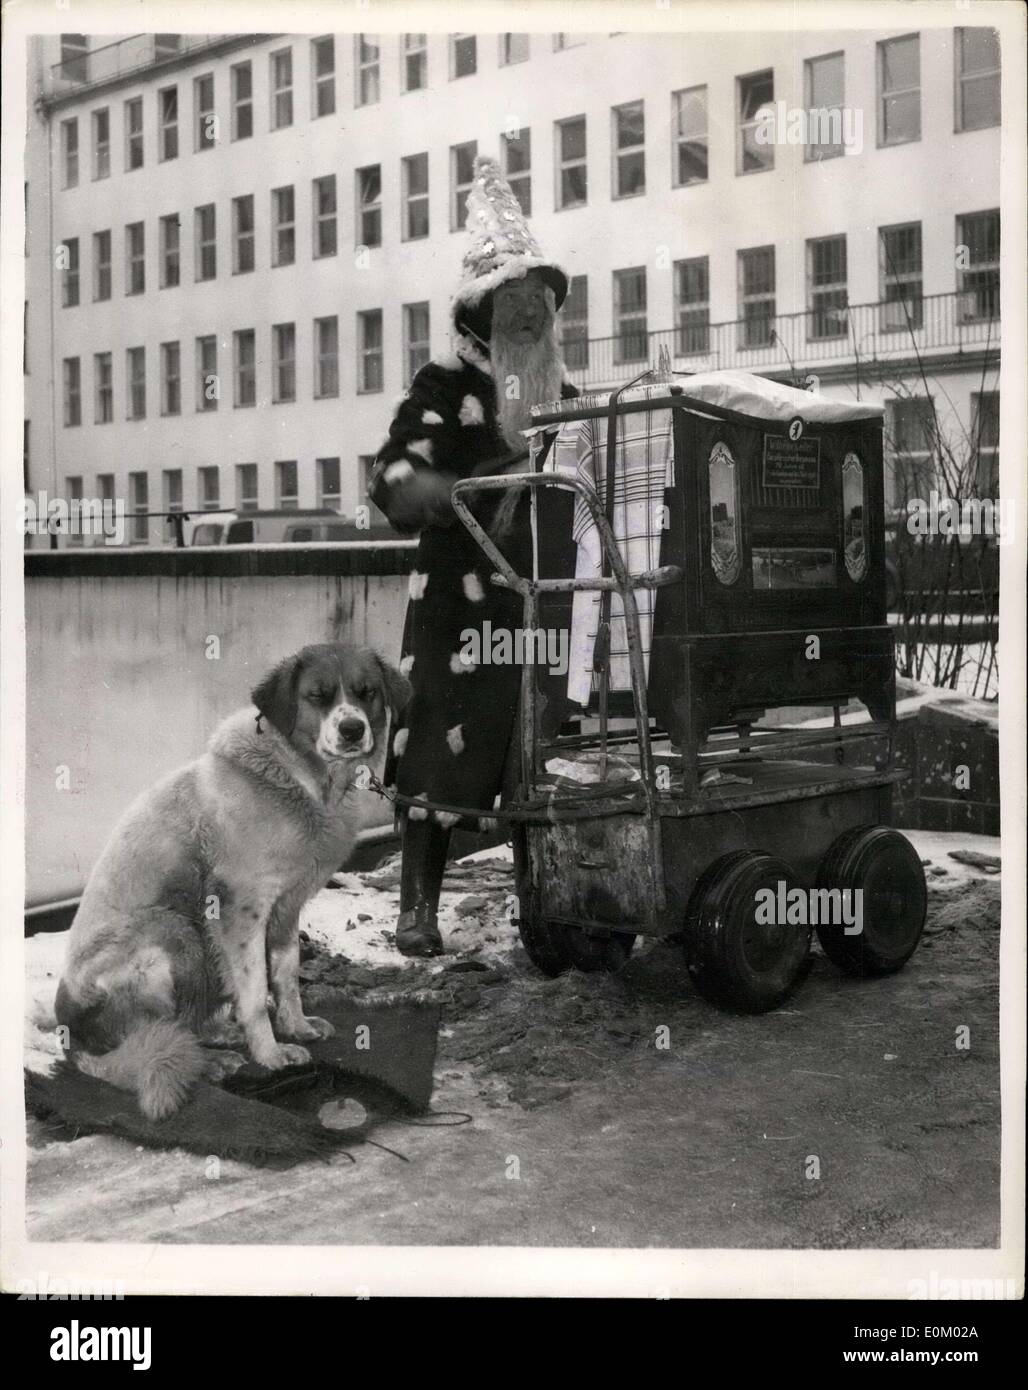 Dec. 18, 1952 - Banished from the Russian zone: Otto Lemke, with his dog and barrel organ, have been expelled from the Russian Zone of Berlin, because his music hinders the people who have work to do. So Otto is now making his music in West Berlin. Photo shows Otto Lemke, and his St. Bernard Dog ''Waldo'' seen with his organ Russians don't appreciate fin music. Stock Photo